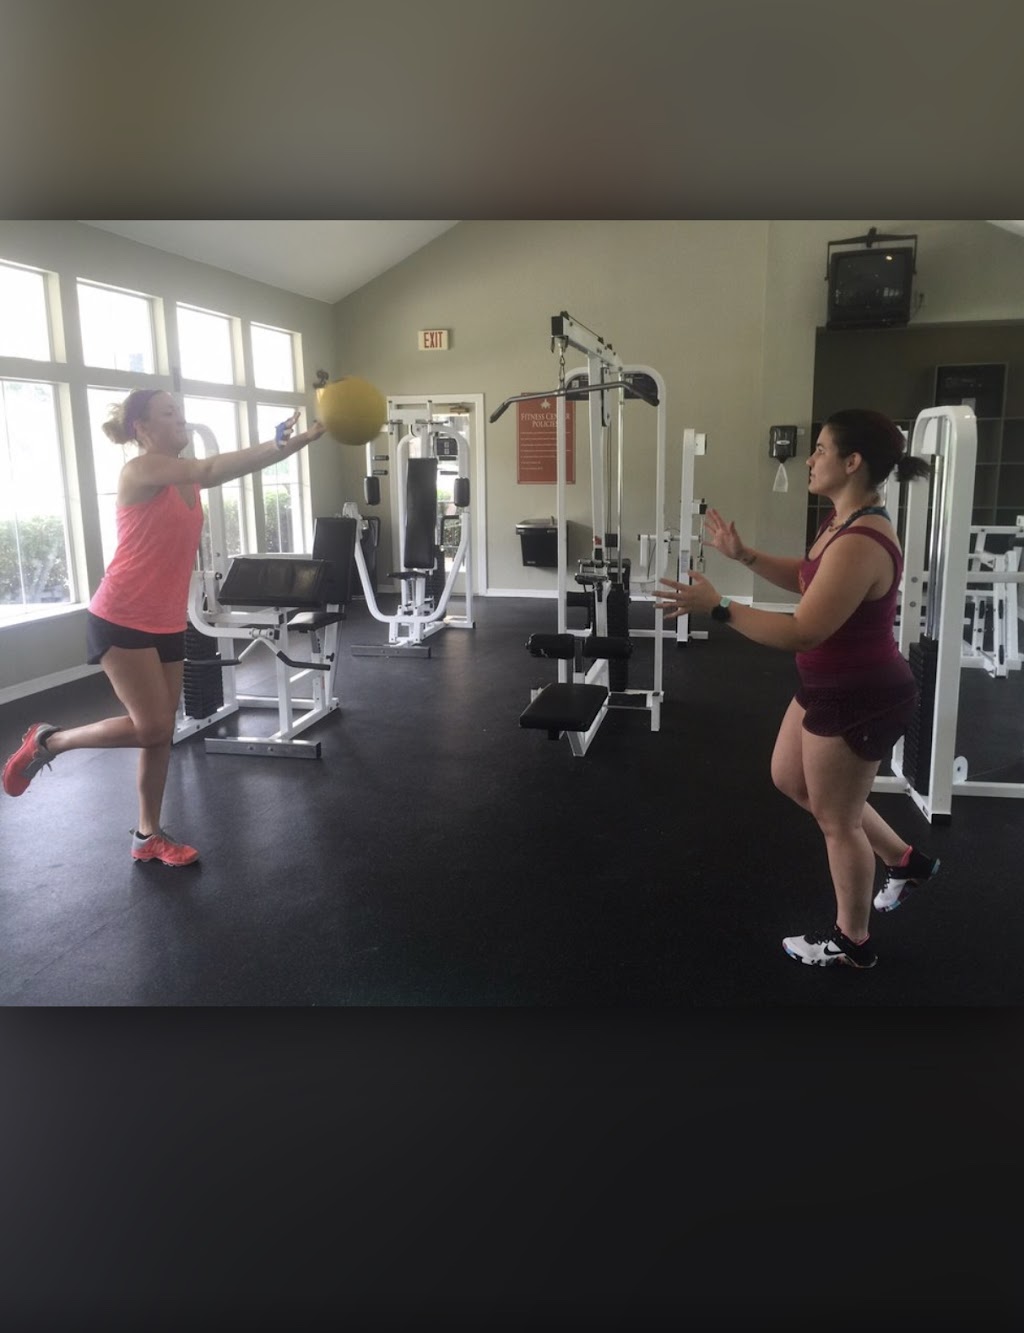 Expounder Fitness | Scuttle Dr, Crowley, TX 76036, USA | Phone: (469) 226-8398